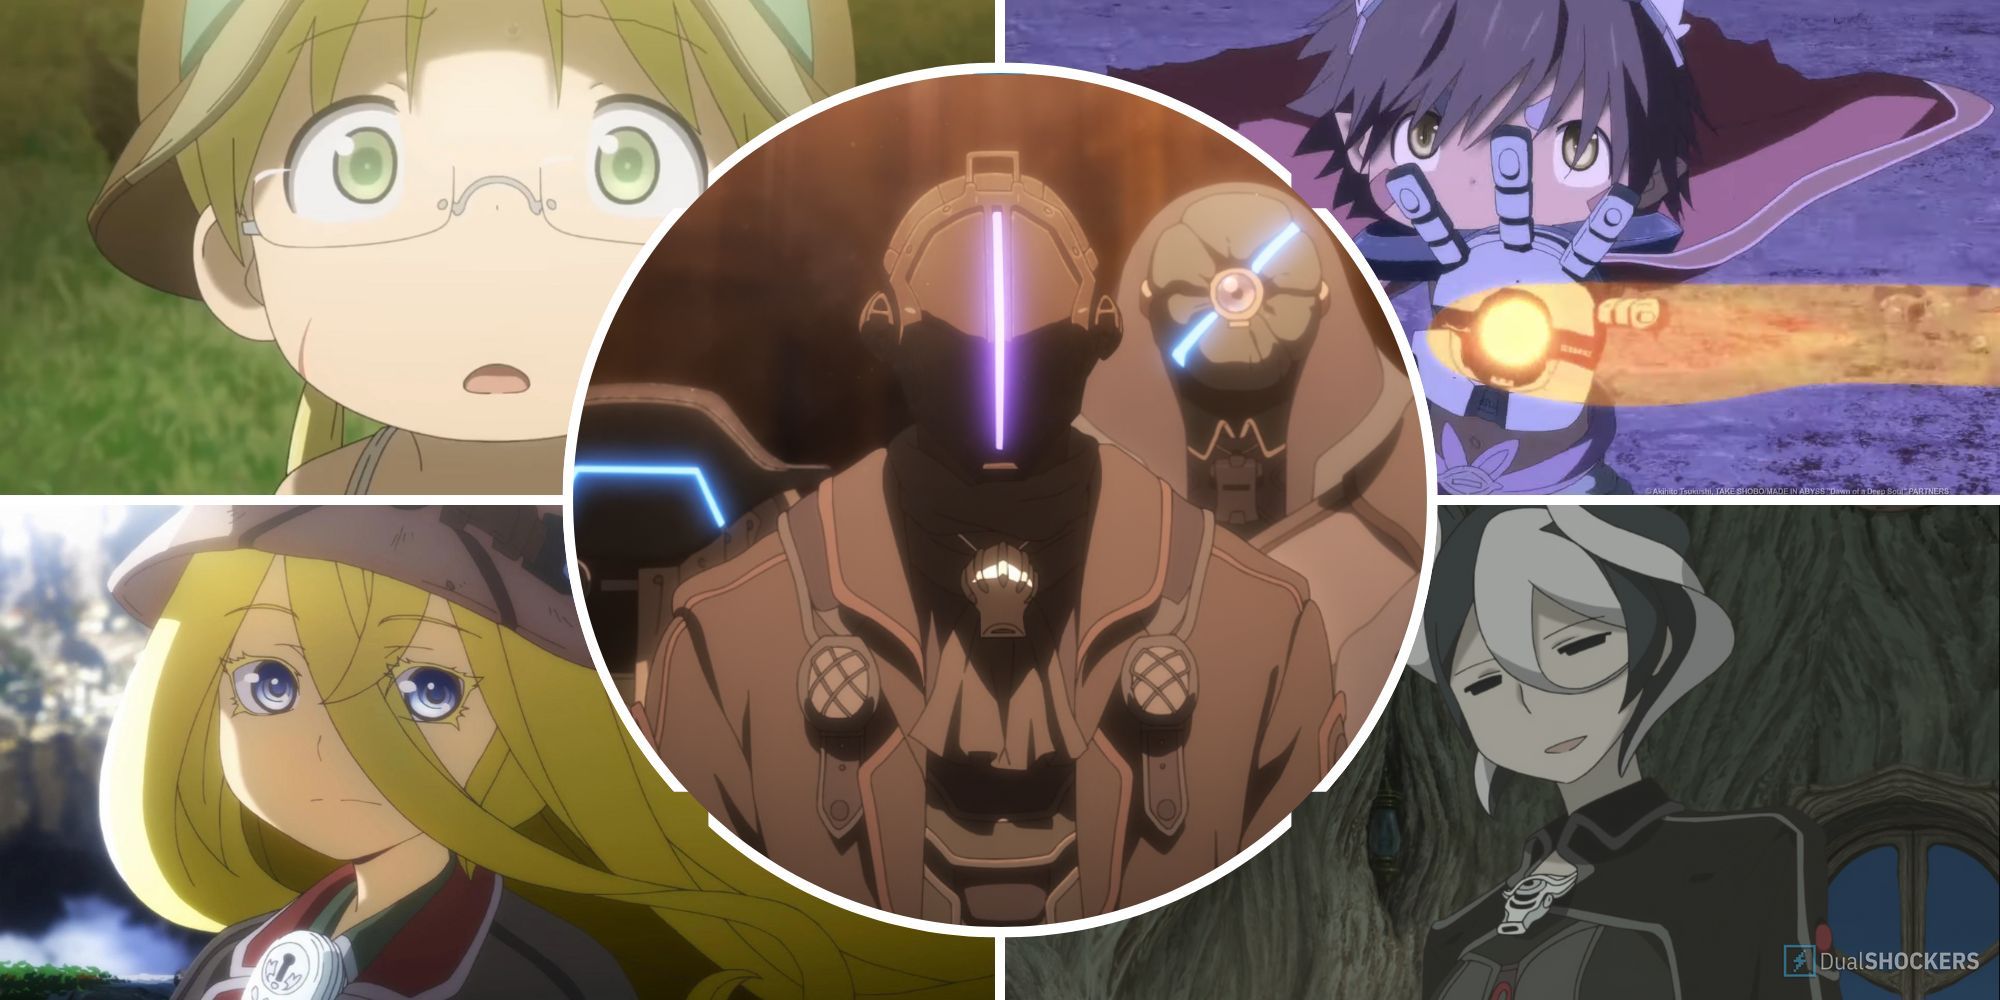 Made Abyss Season 2 Watch, Made Abyss Season 2 Characters